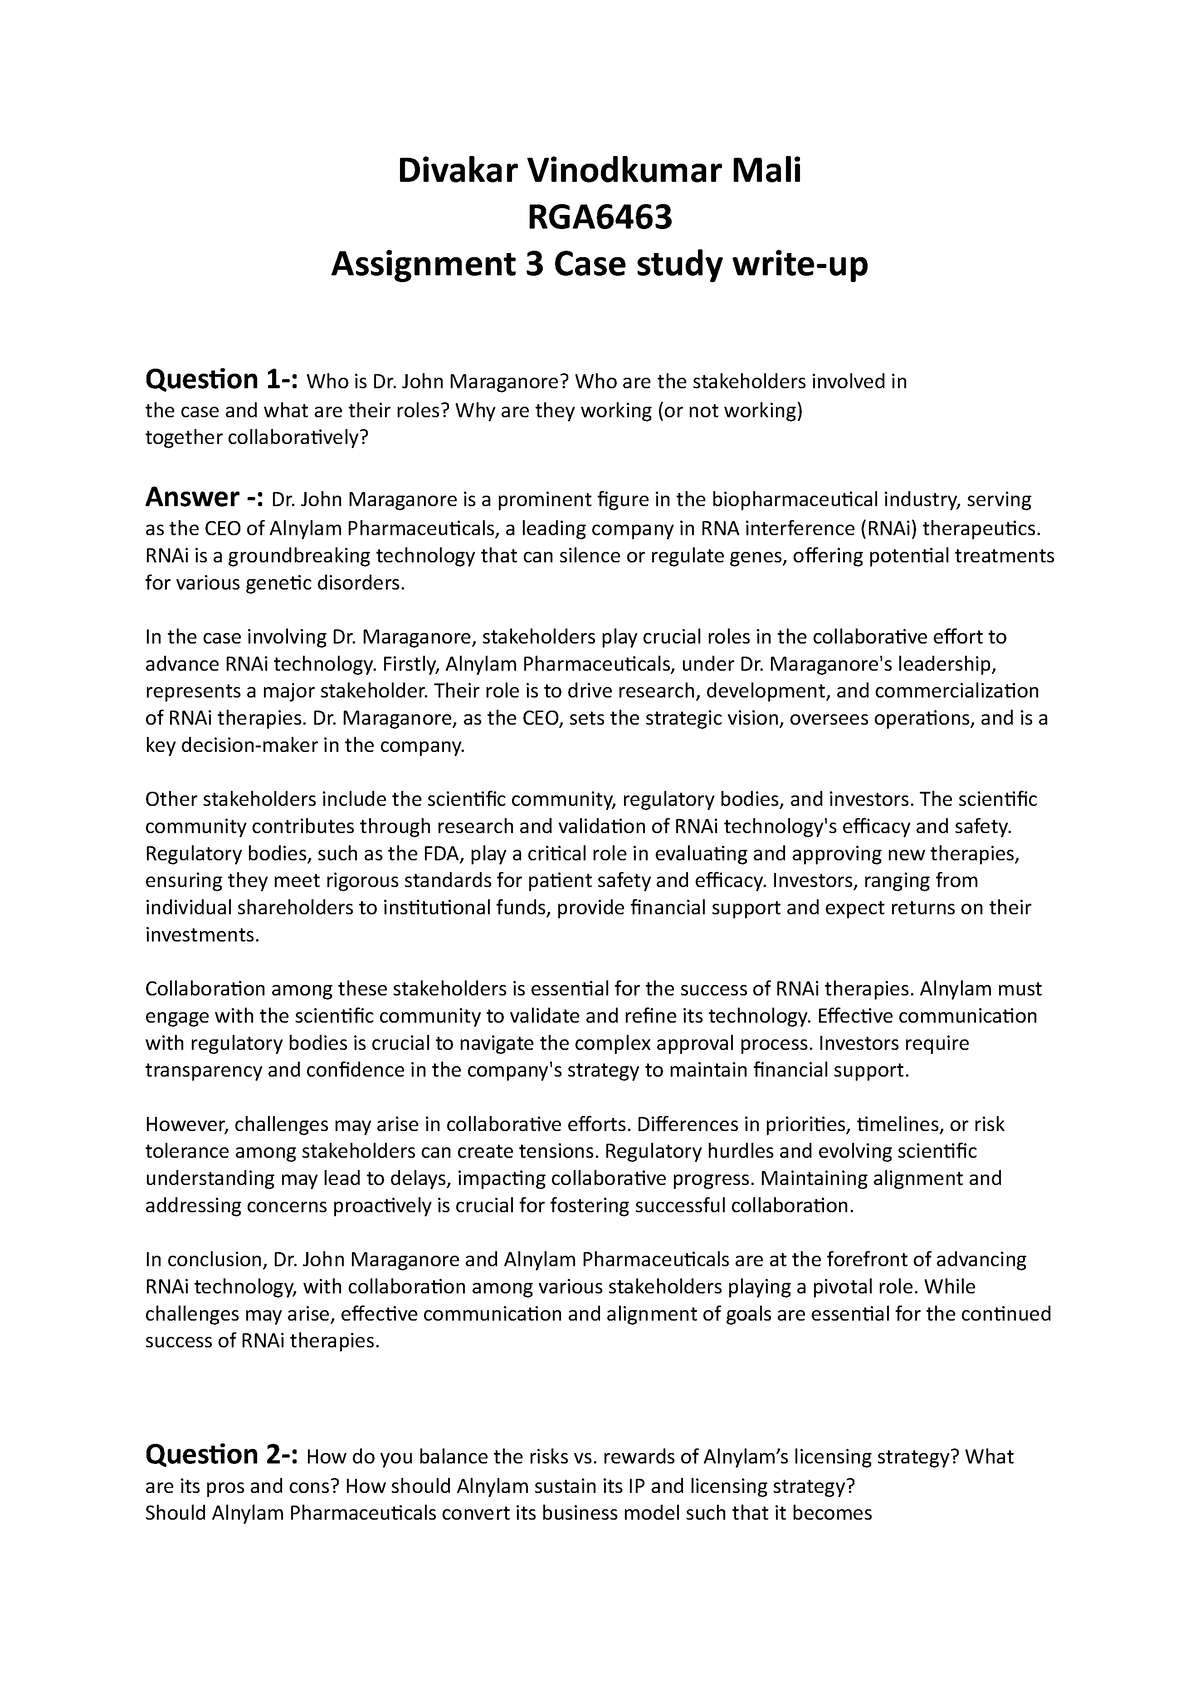 assignment 3 case study